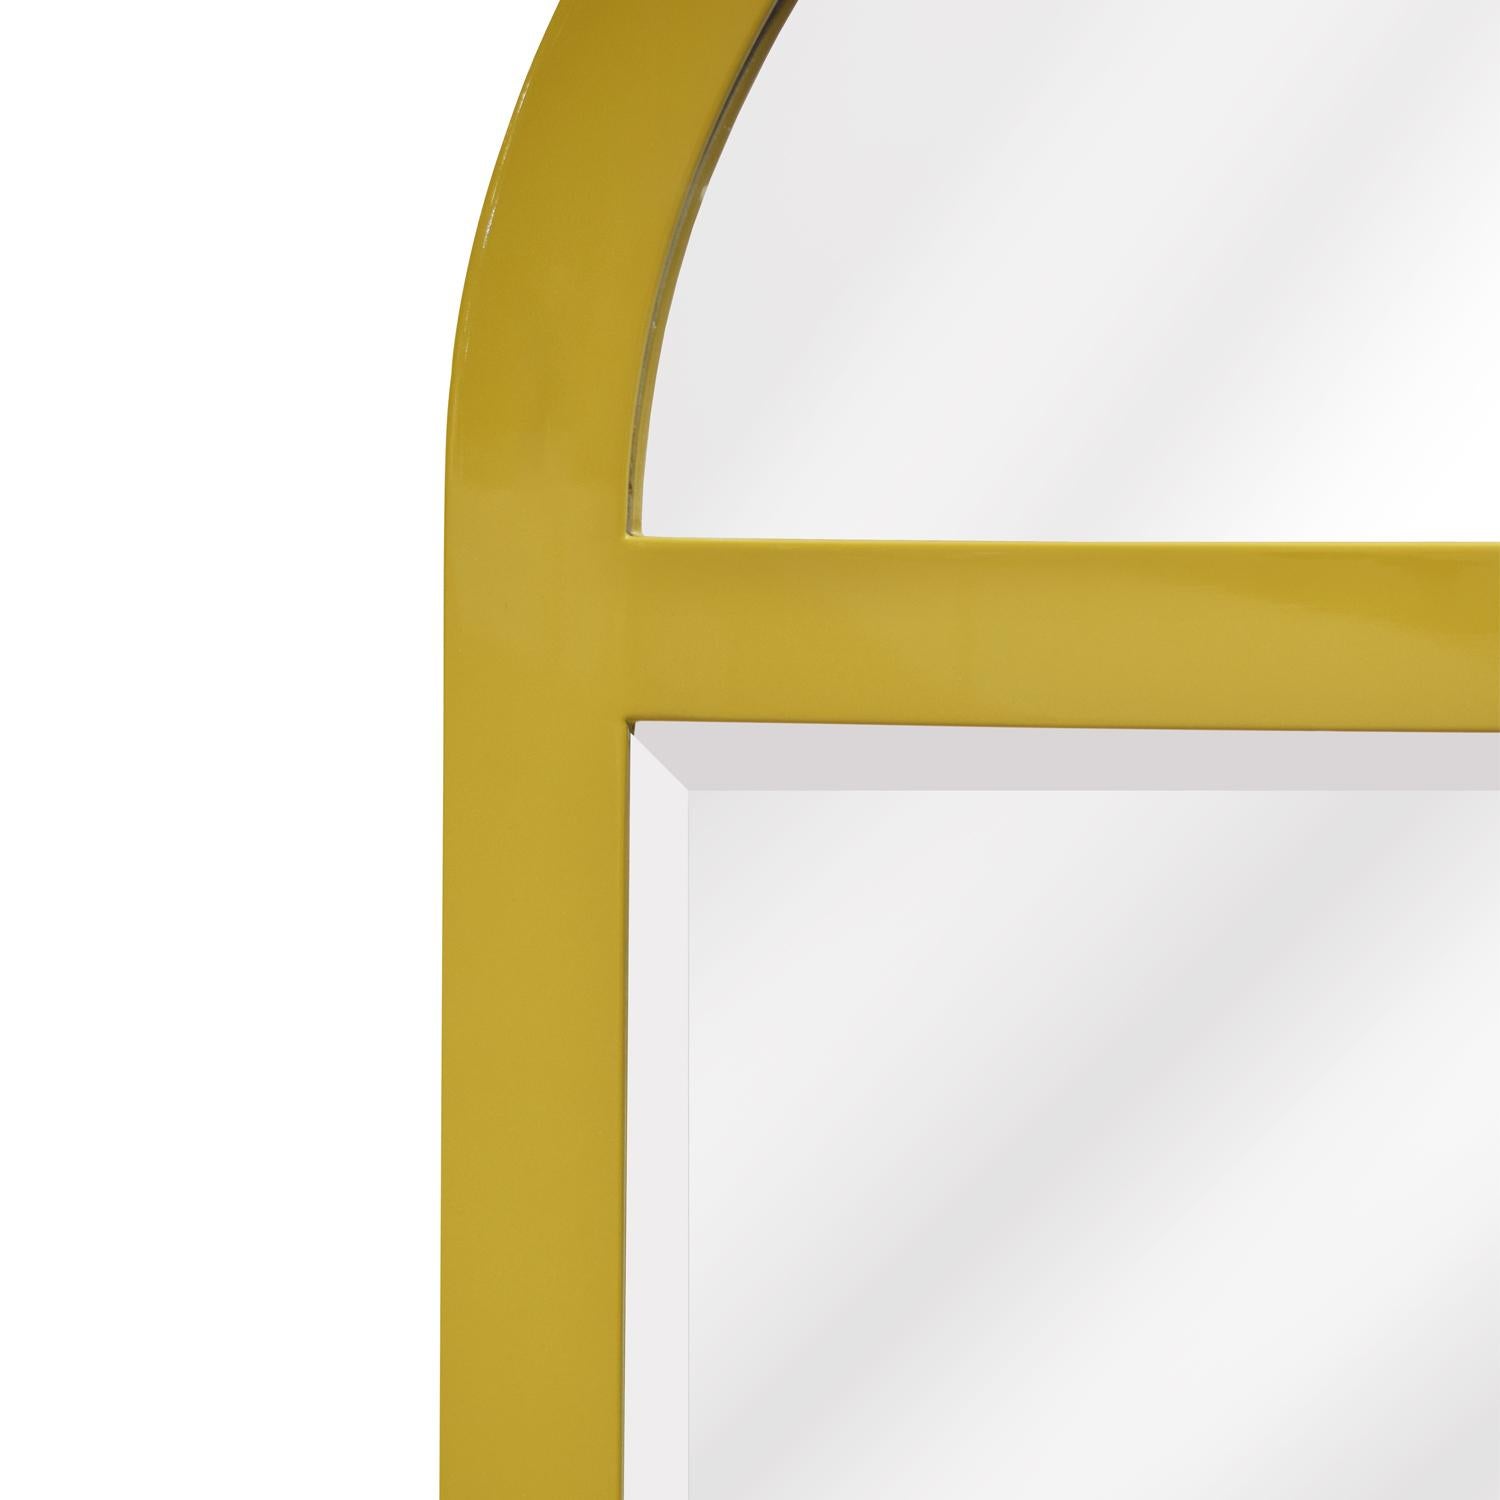 American Karl Springer Wall Hanging Mirror in Mustard Lacquer, 1970s